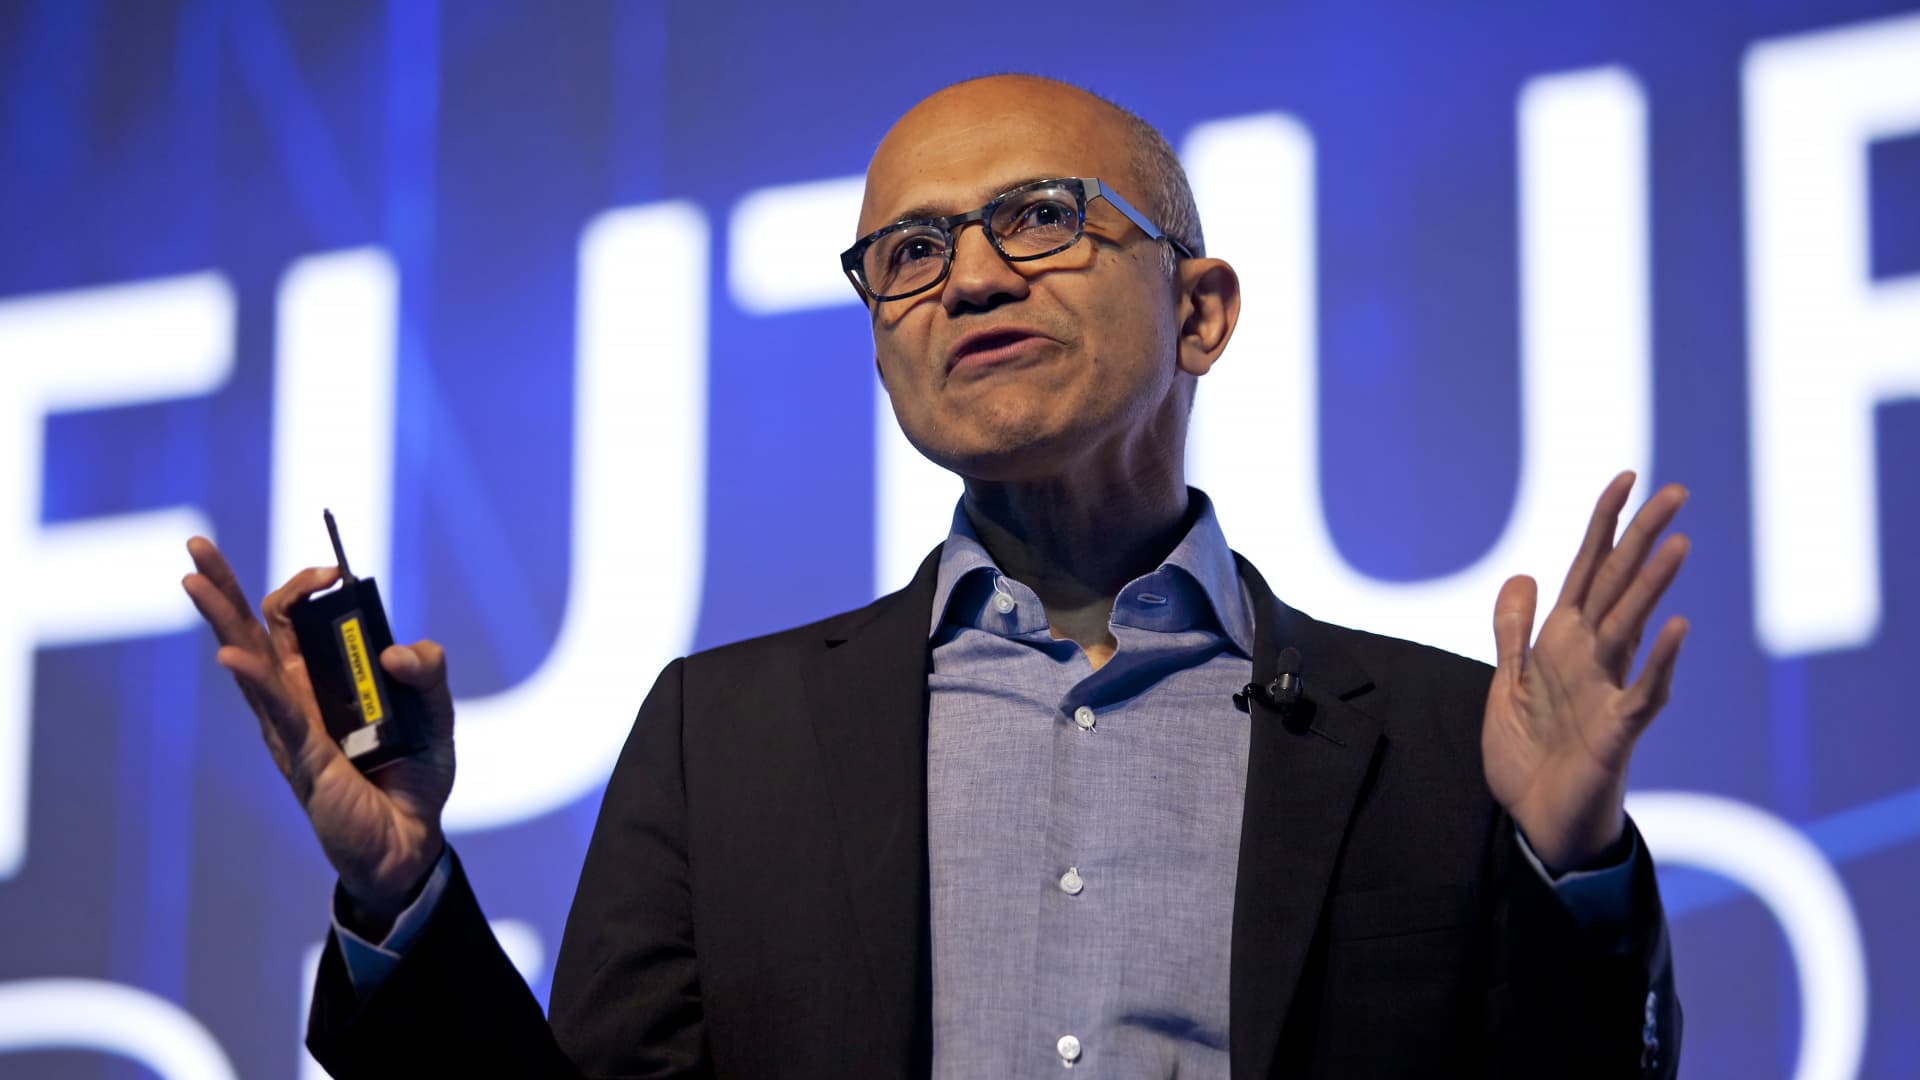 Microsoft is touting the size and growth rate of its Salesforce rival Dynamics 